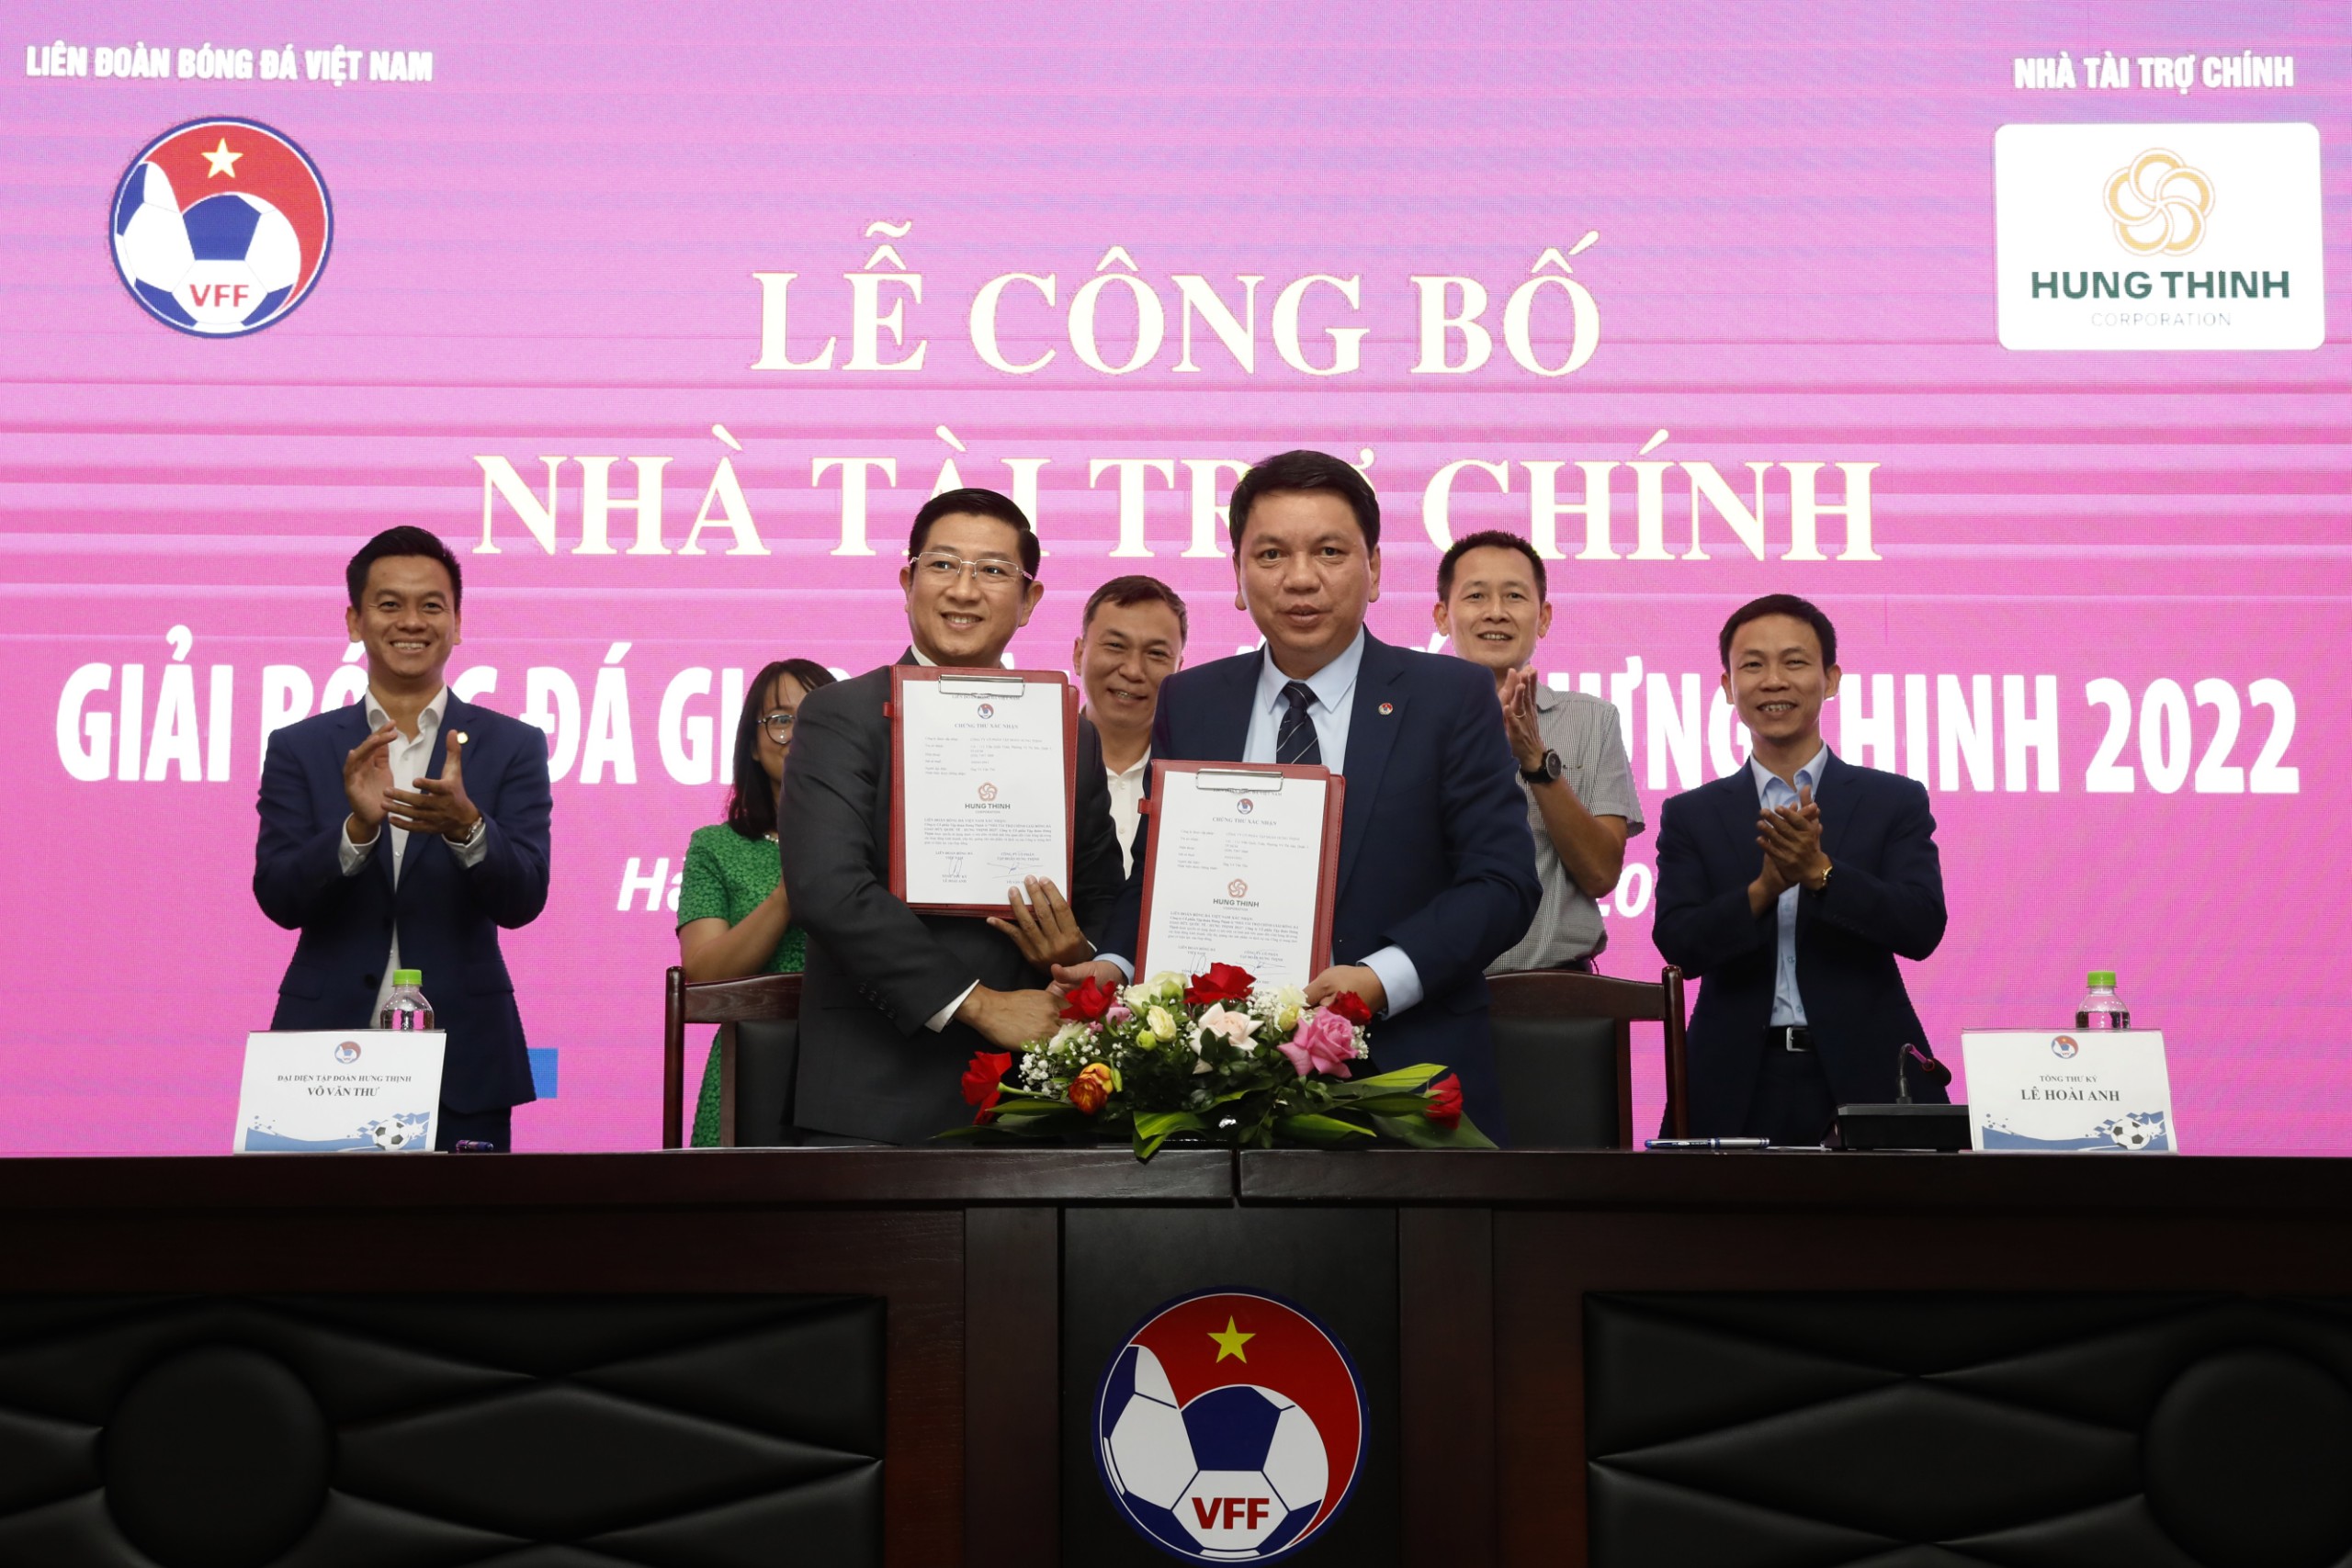 HUNG THINH CORPORATION IS A MAIN SPONSOR OF THE INTERNATIONAL FRIENDLY FOOTBALL TOURNAMENT – HUNG THINH 2022